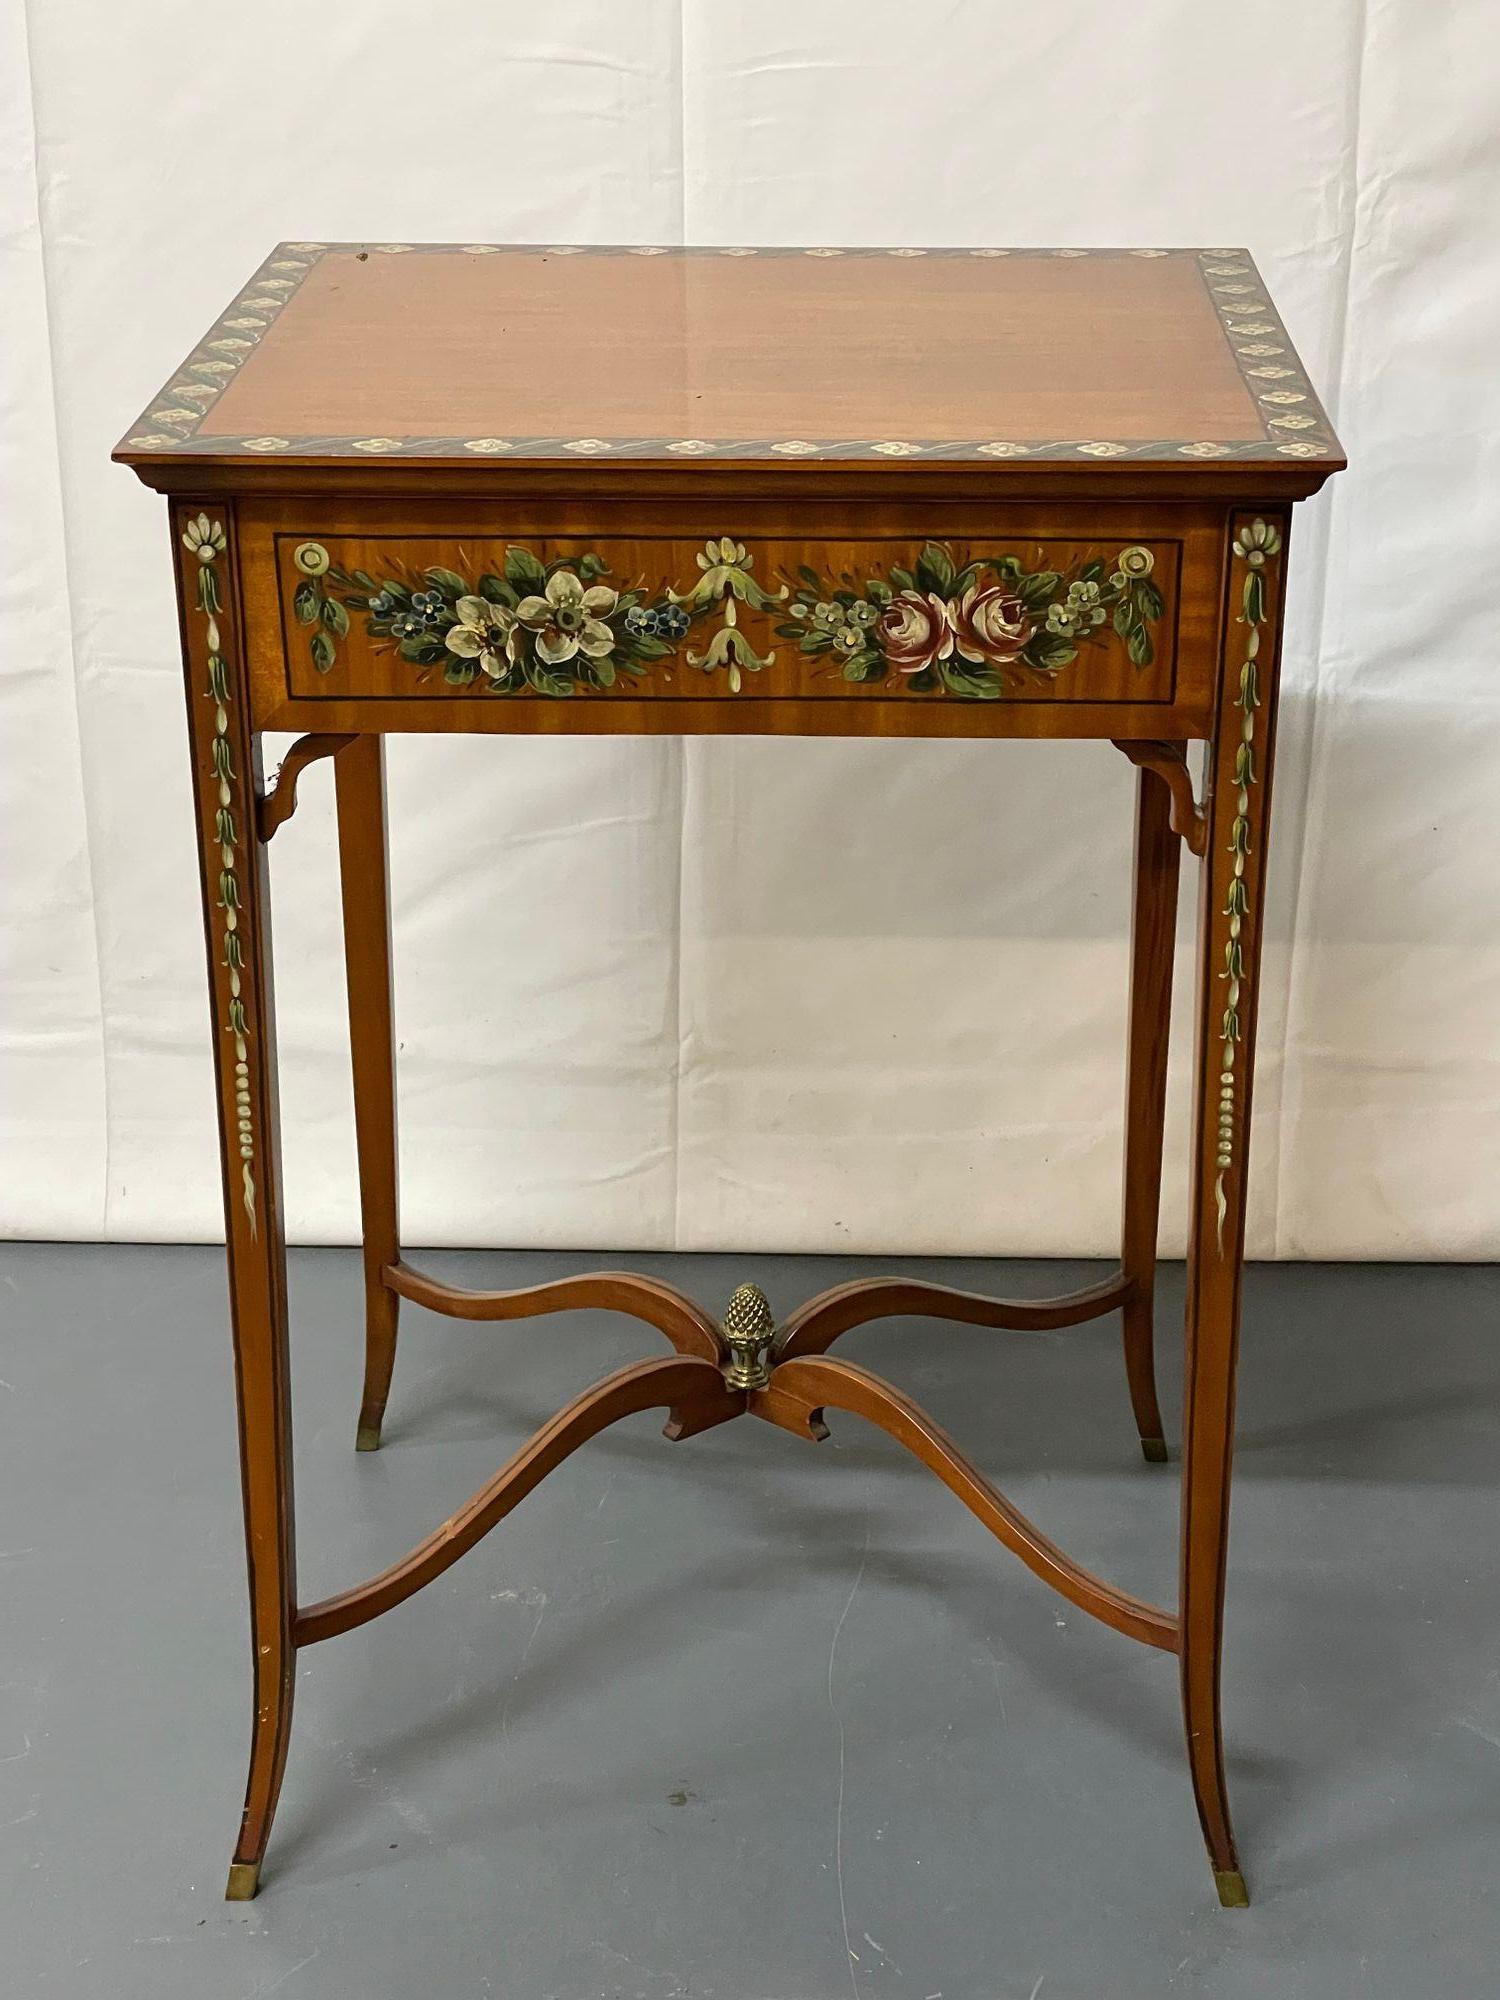 Satinwood Adams style inlaid end / side / bedside table, Maitland Smith.
 
A finely hand-painted, satinwood single drawer end table bearing the Maitland Smith label. Beautiful green leaves and rosettes adorn the top and sides and a handsome bronze